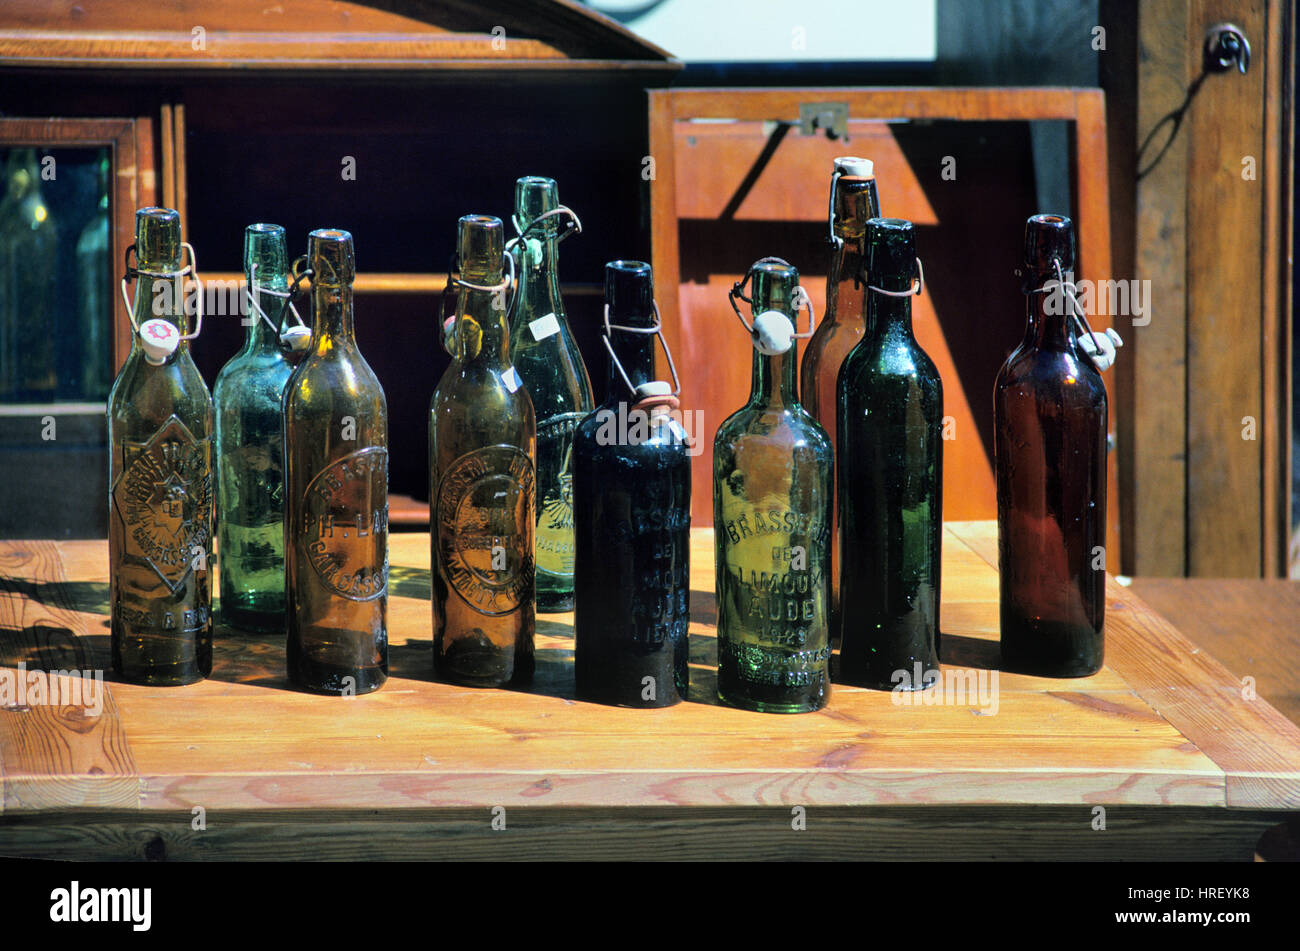 Antique or Vintage Bottles for Sale at an Antique Market or Fair on the Cours Mirabeau Aix-en-Provence Provence France Stock Photo